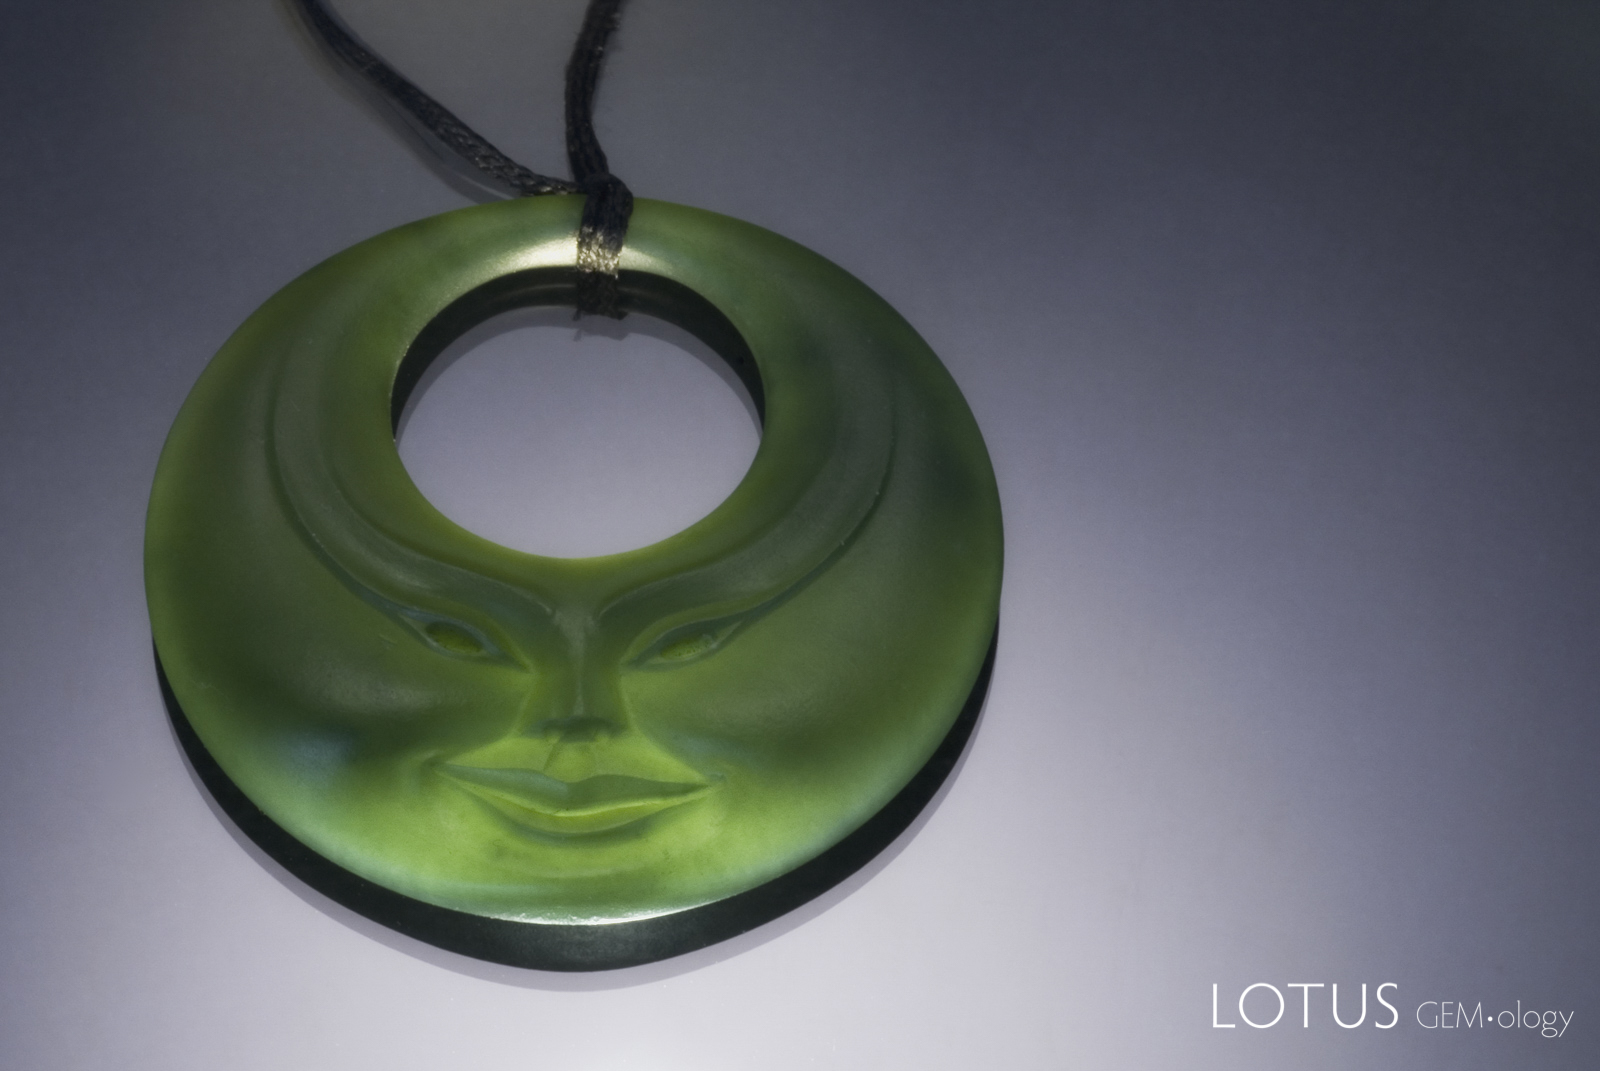 Donn Salt is considered by many to be the top jade carver in New Zealand. This piece, purchased by the author in Auckland, is an example of his work. Photo: Wimon Manorotkul